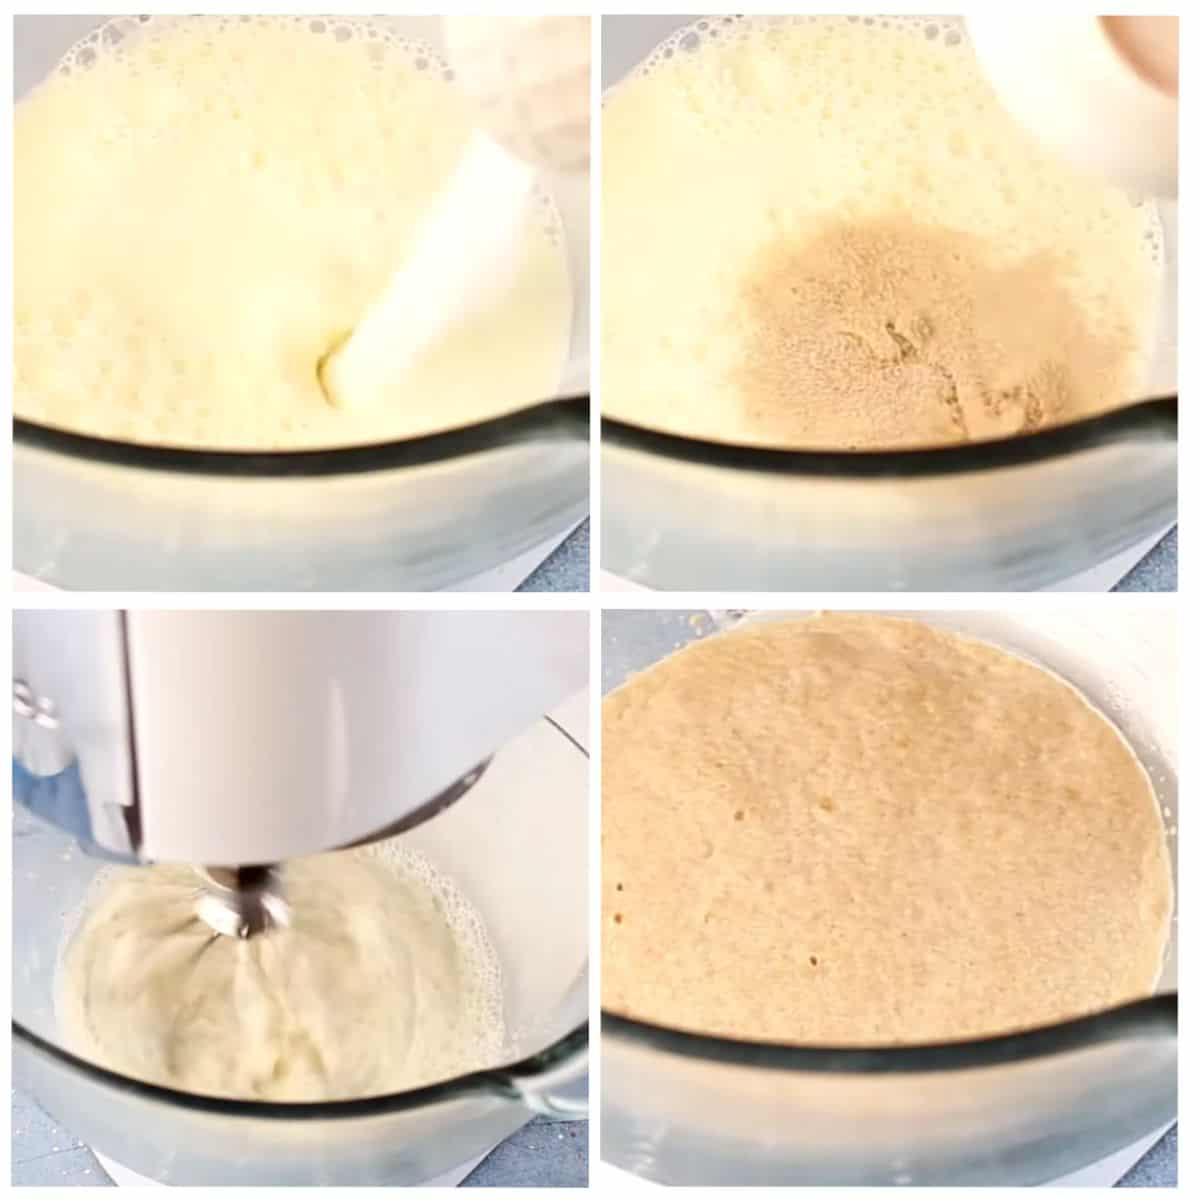 mixing the milk, granulated sugar, and yeast in a mixing bowl